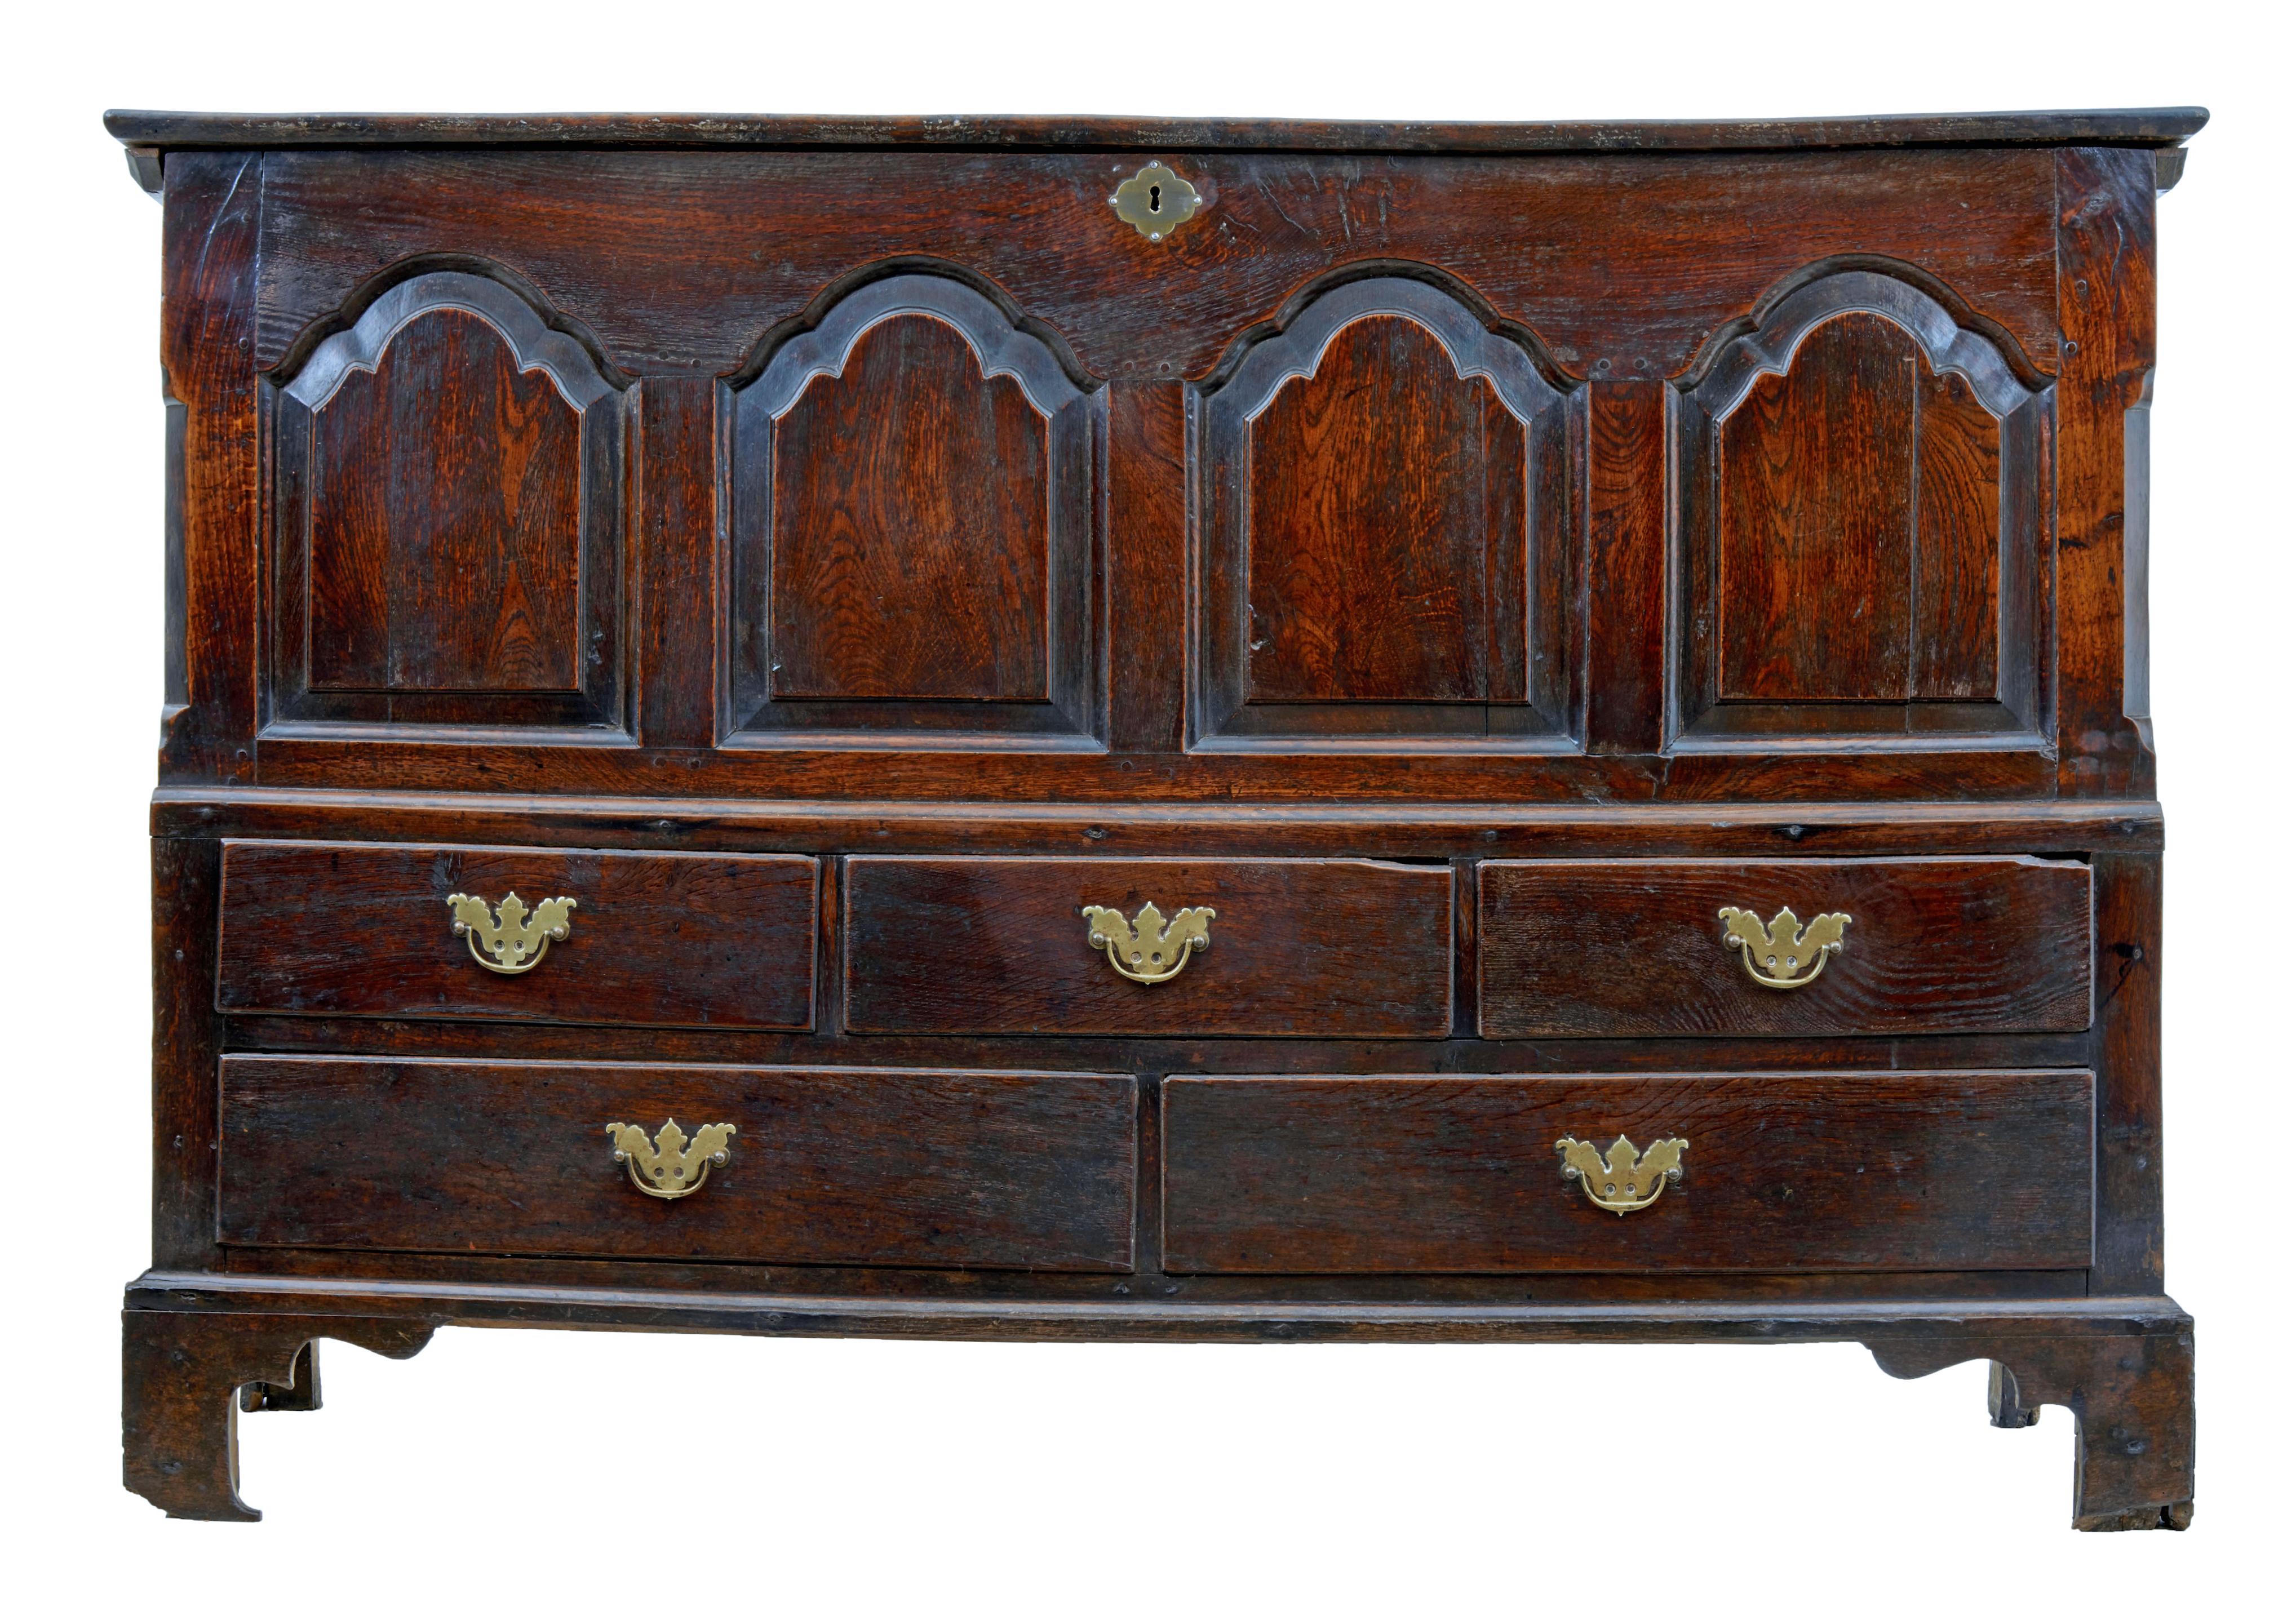 Late 17th century Welsh oak mule chest coffer circa 1690.

Fine quality Welsh oak mule chest circa 1690. Stunning colour and patina to this piece and apart from 1 additional hinge it is in original condition. Fielded panels to the front, with 3